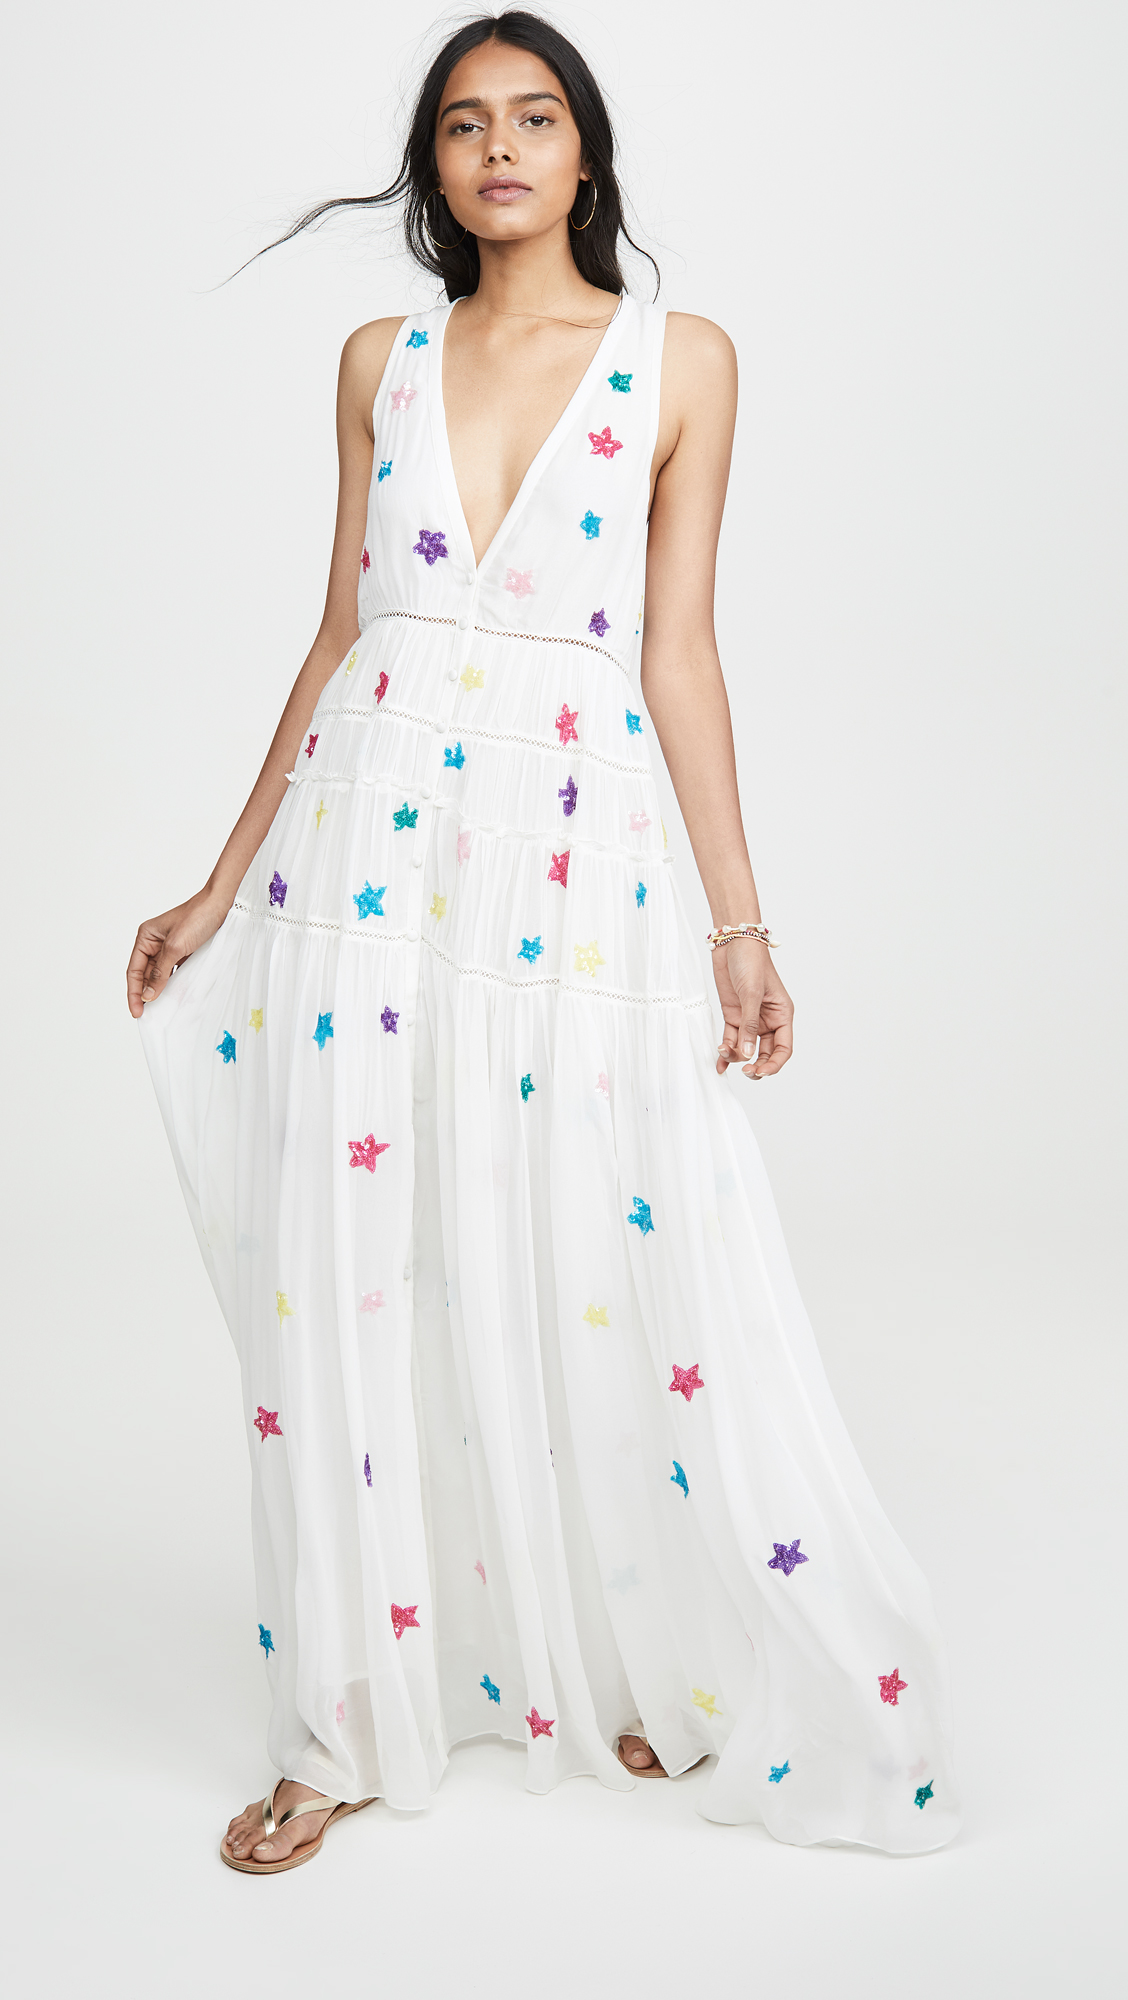 dresses with stars